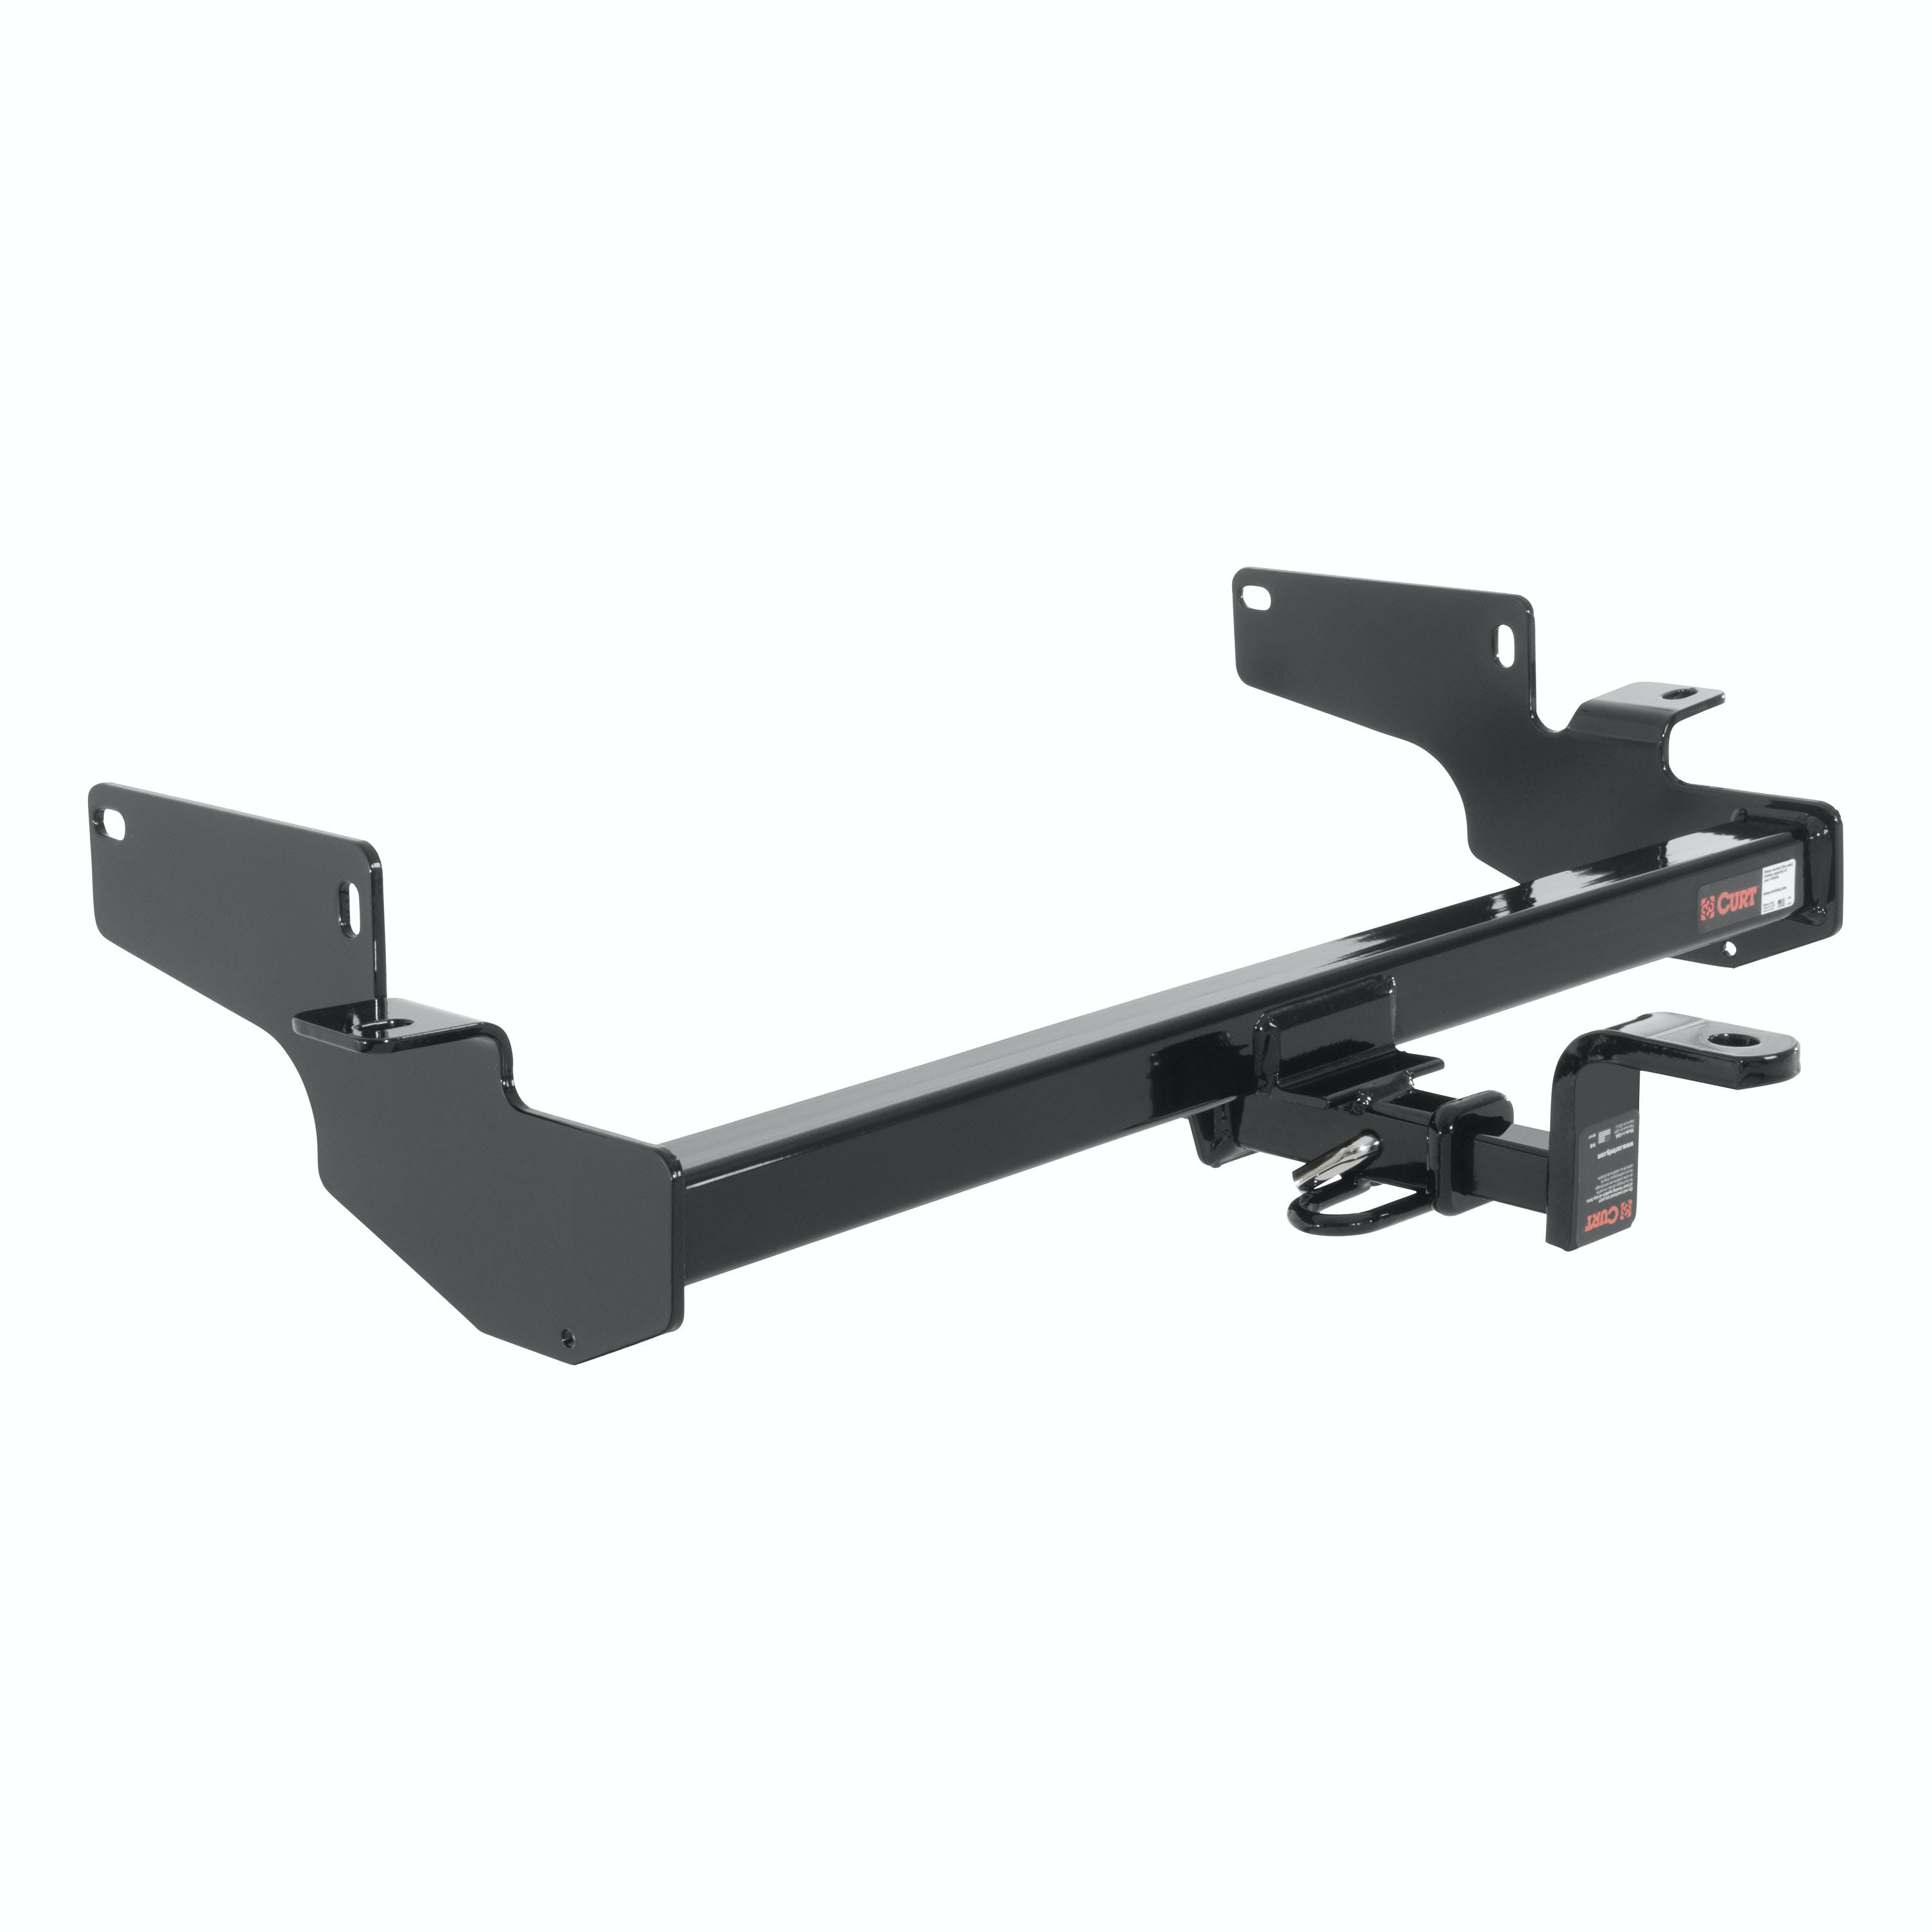 CURT 120583 Class 2 Trailer Hitch, 1-1/4 Ball Mount, Select Cadillac DeVille, DTS